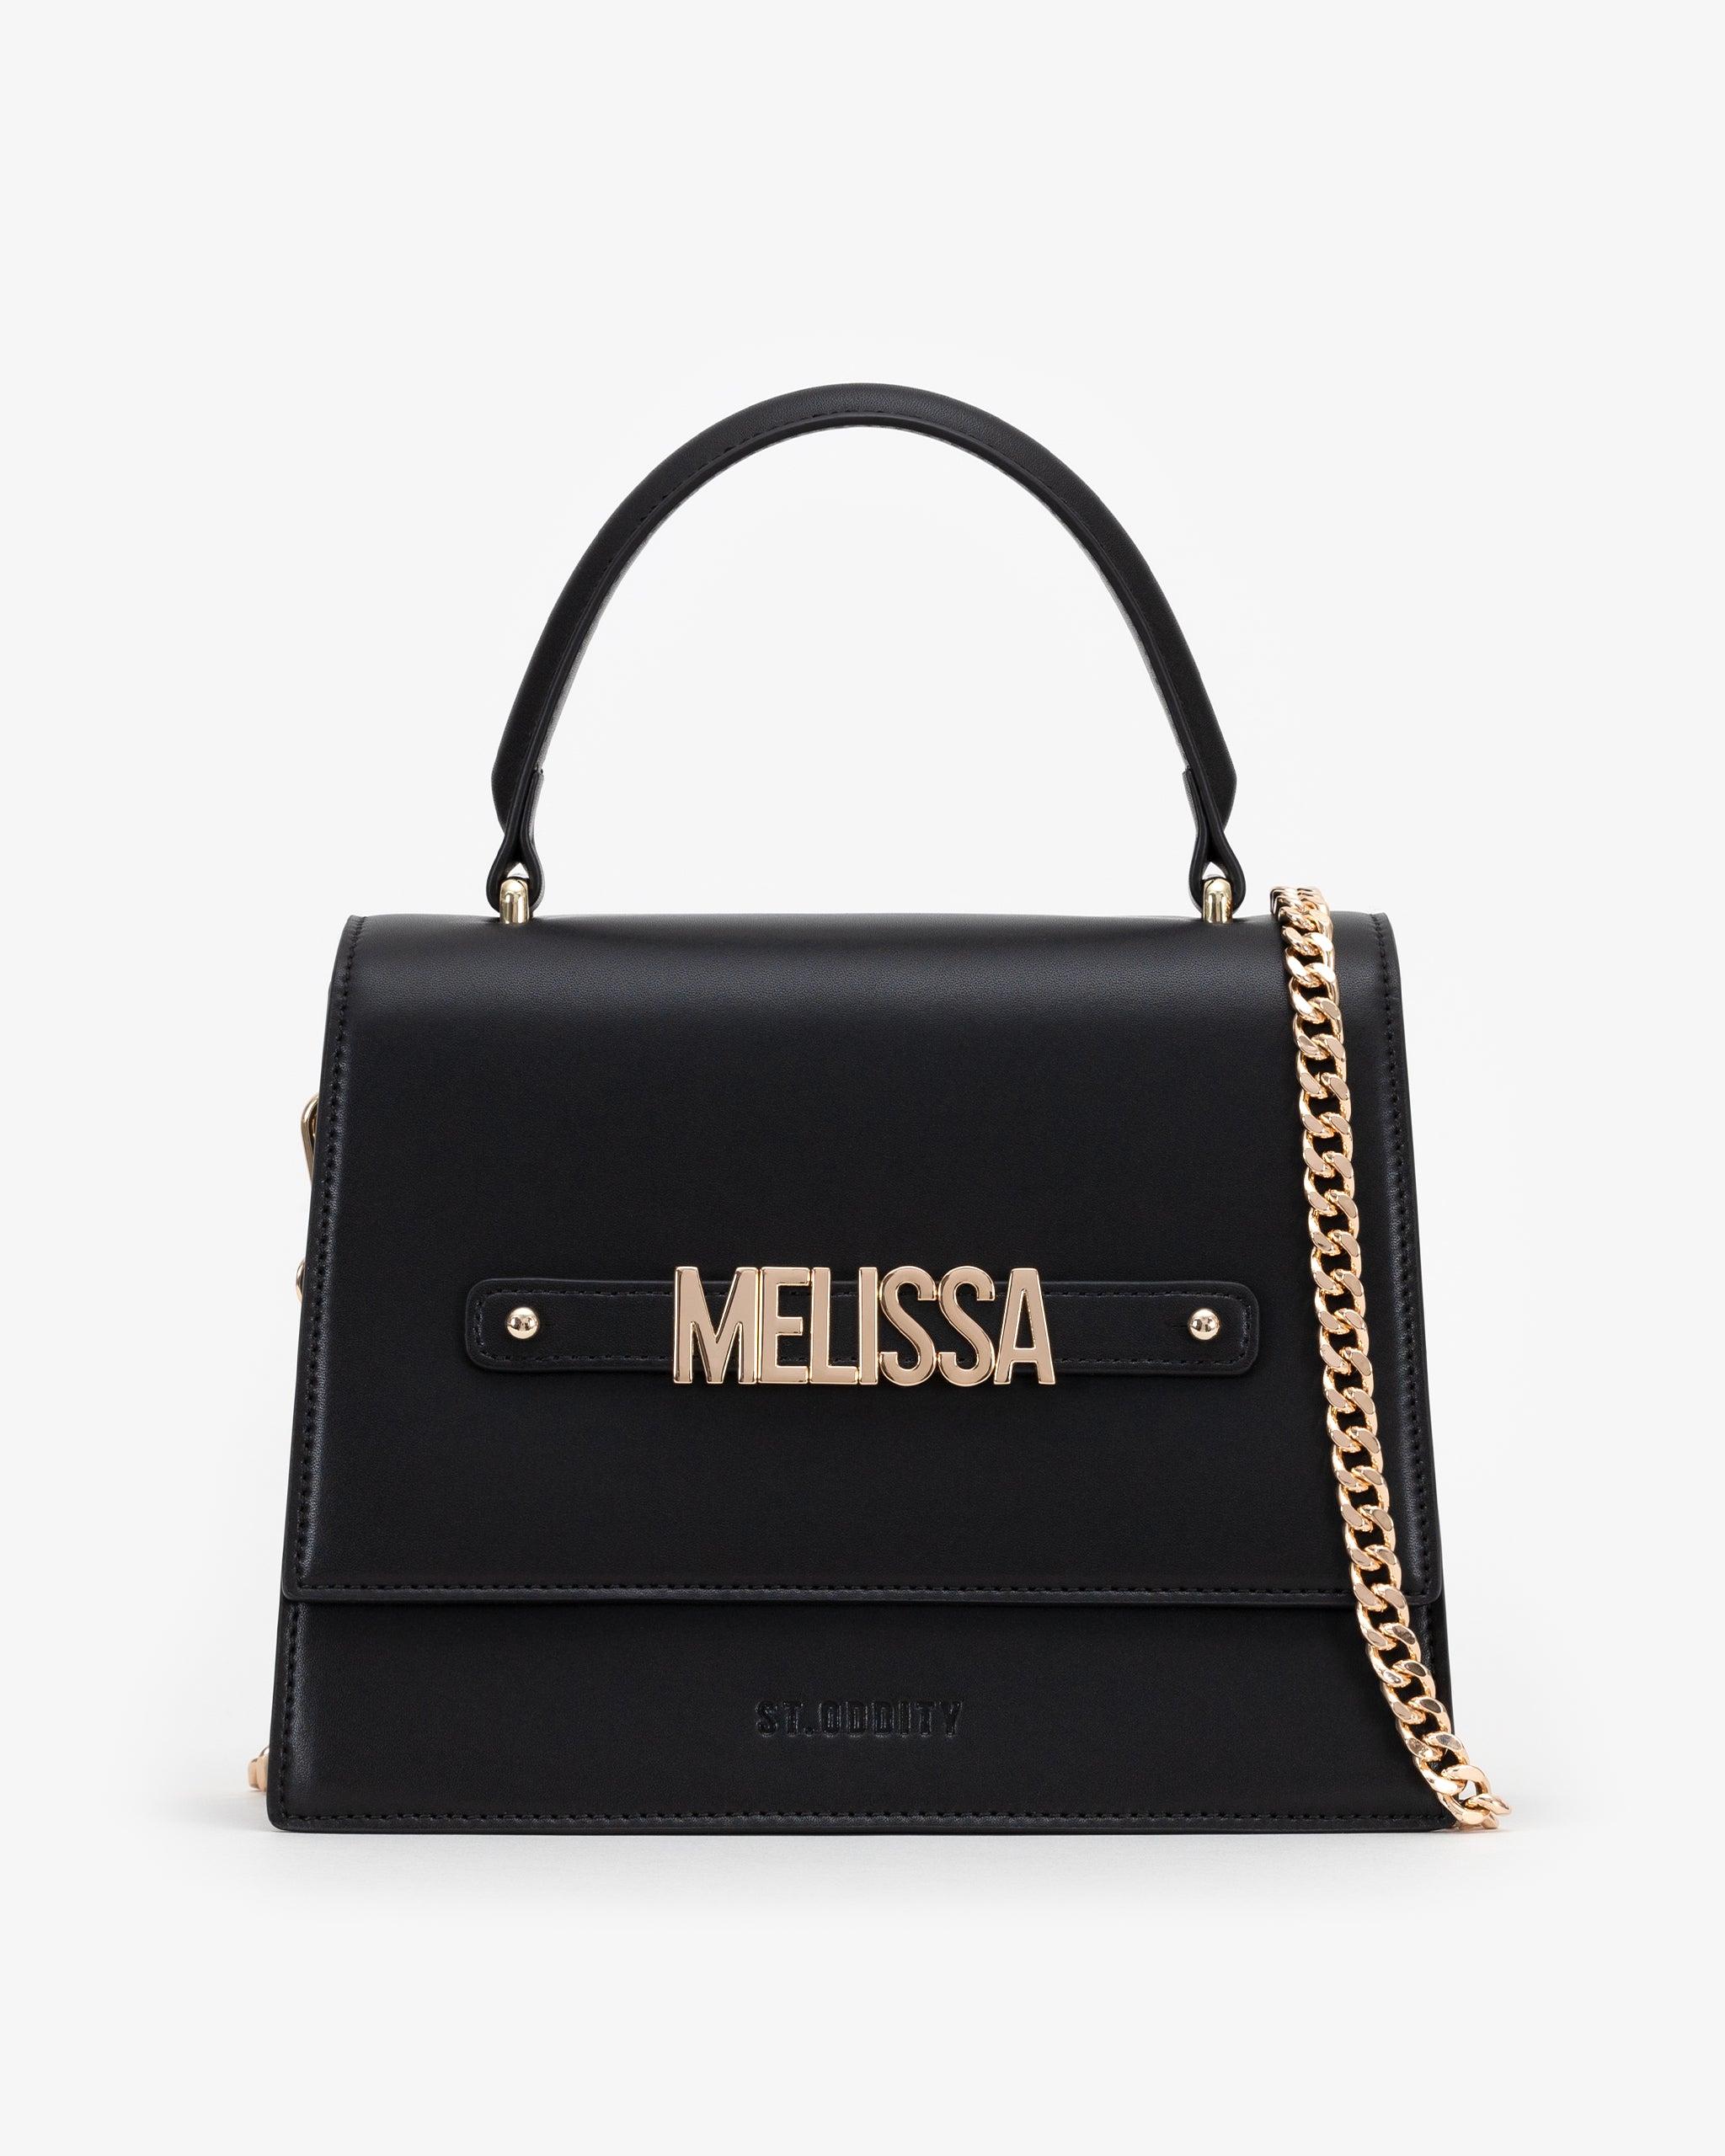 Pre-order (Mid-May): Large Evening Bag in Black/Gold with Personalised Hardware